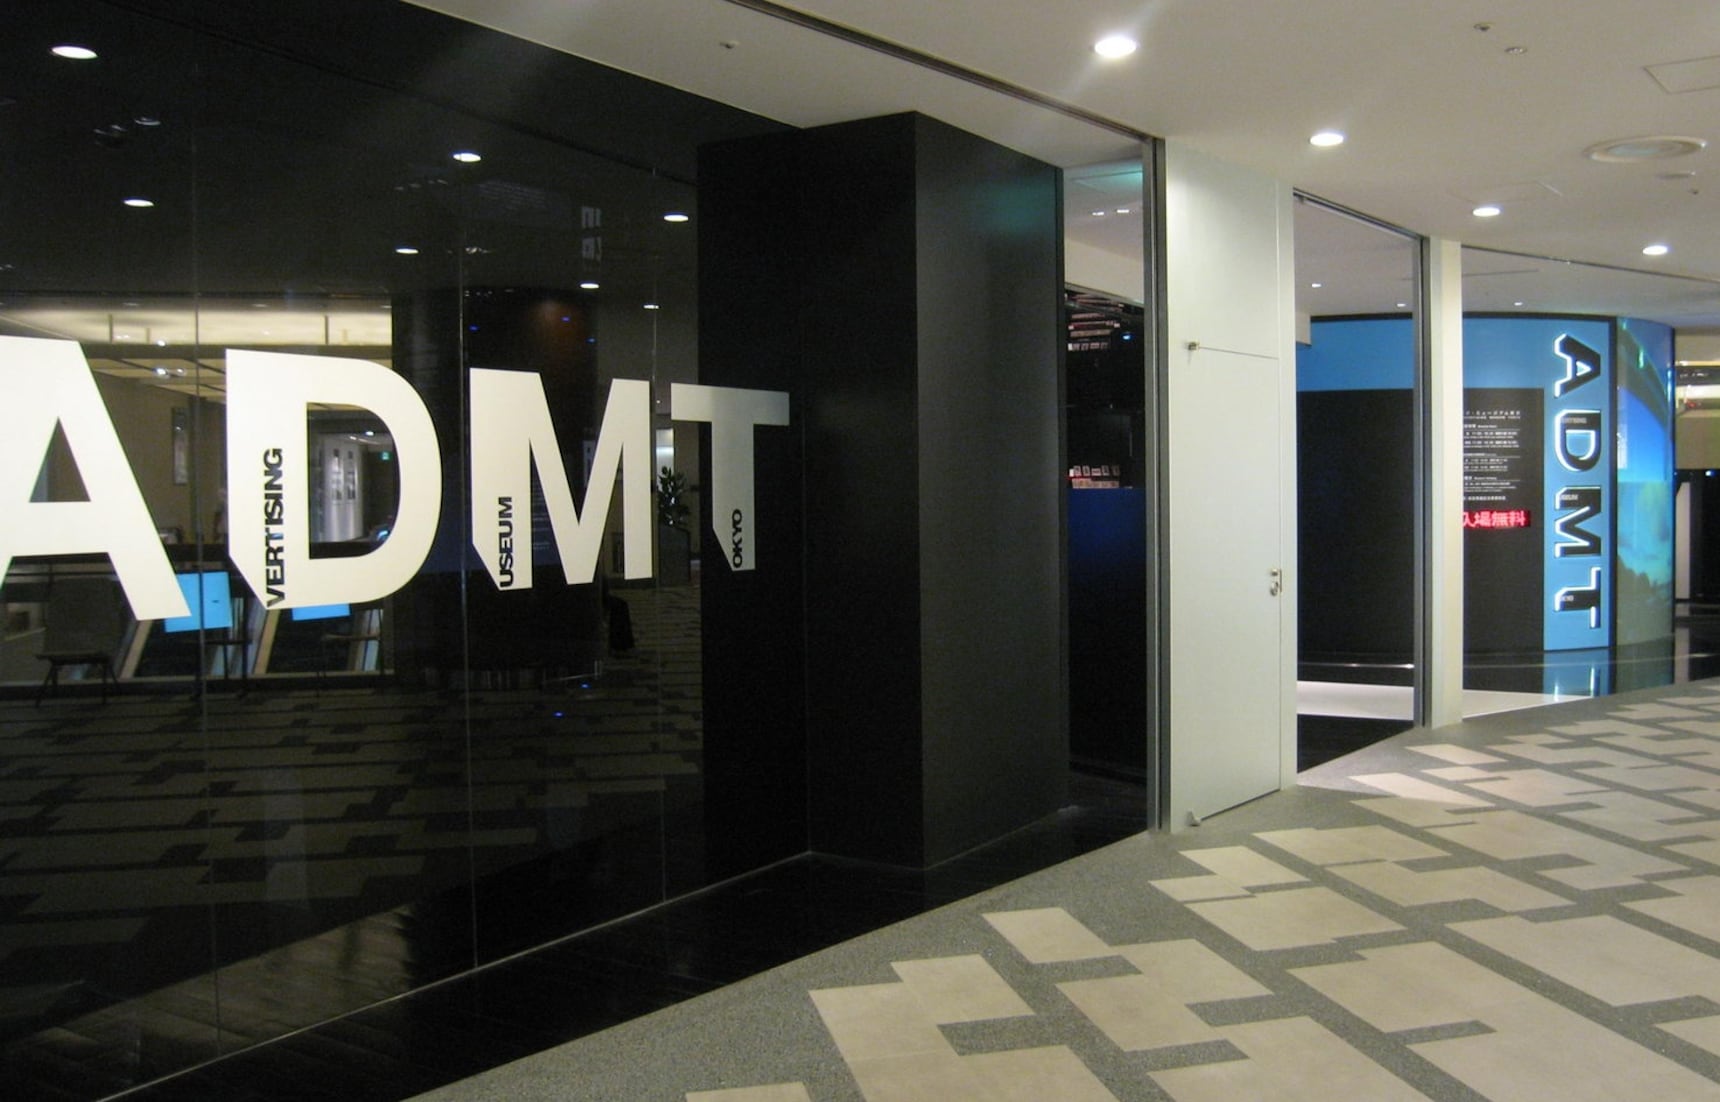 All About ADMT: Advertising Museum Tokyo